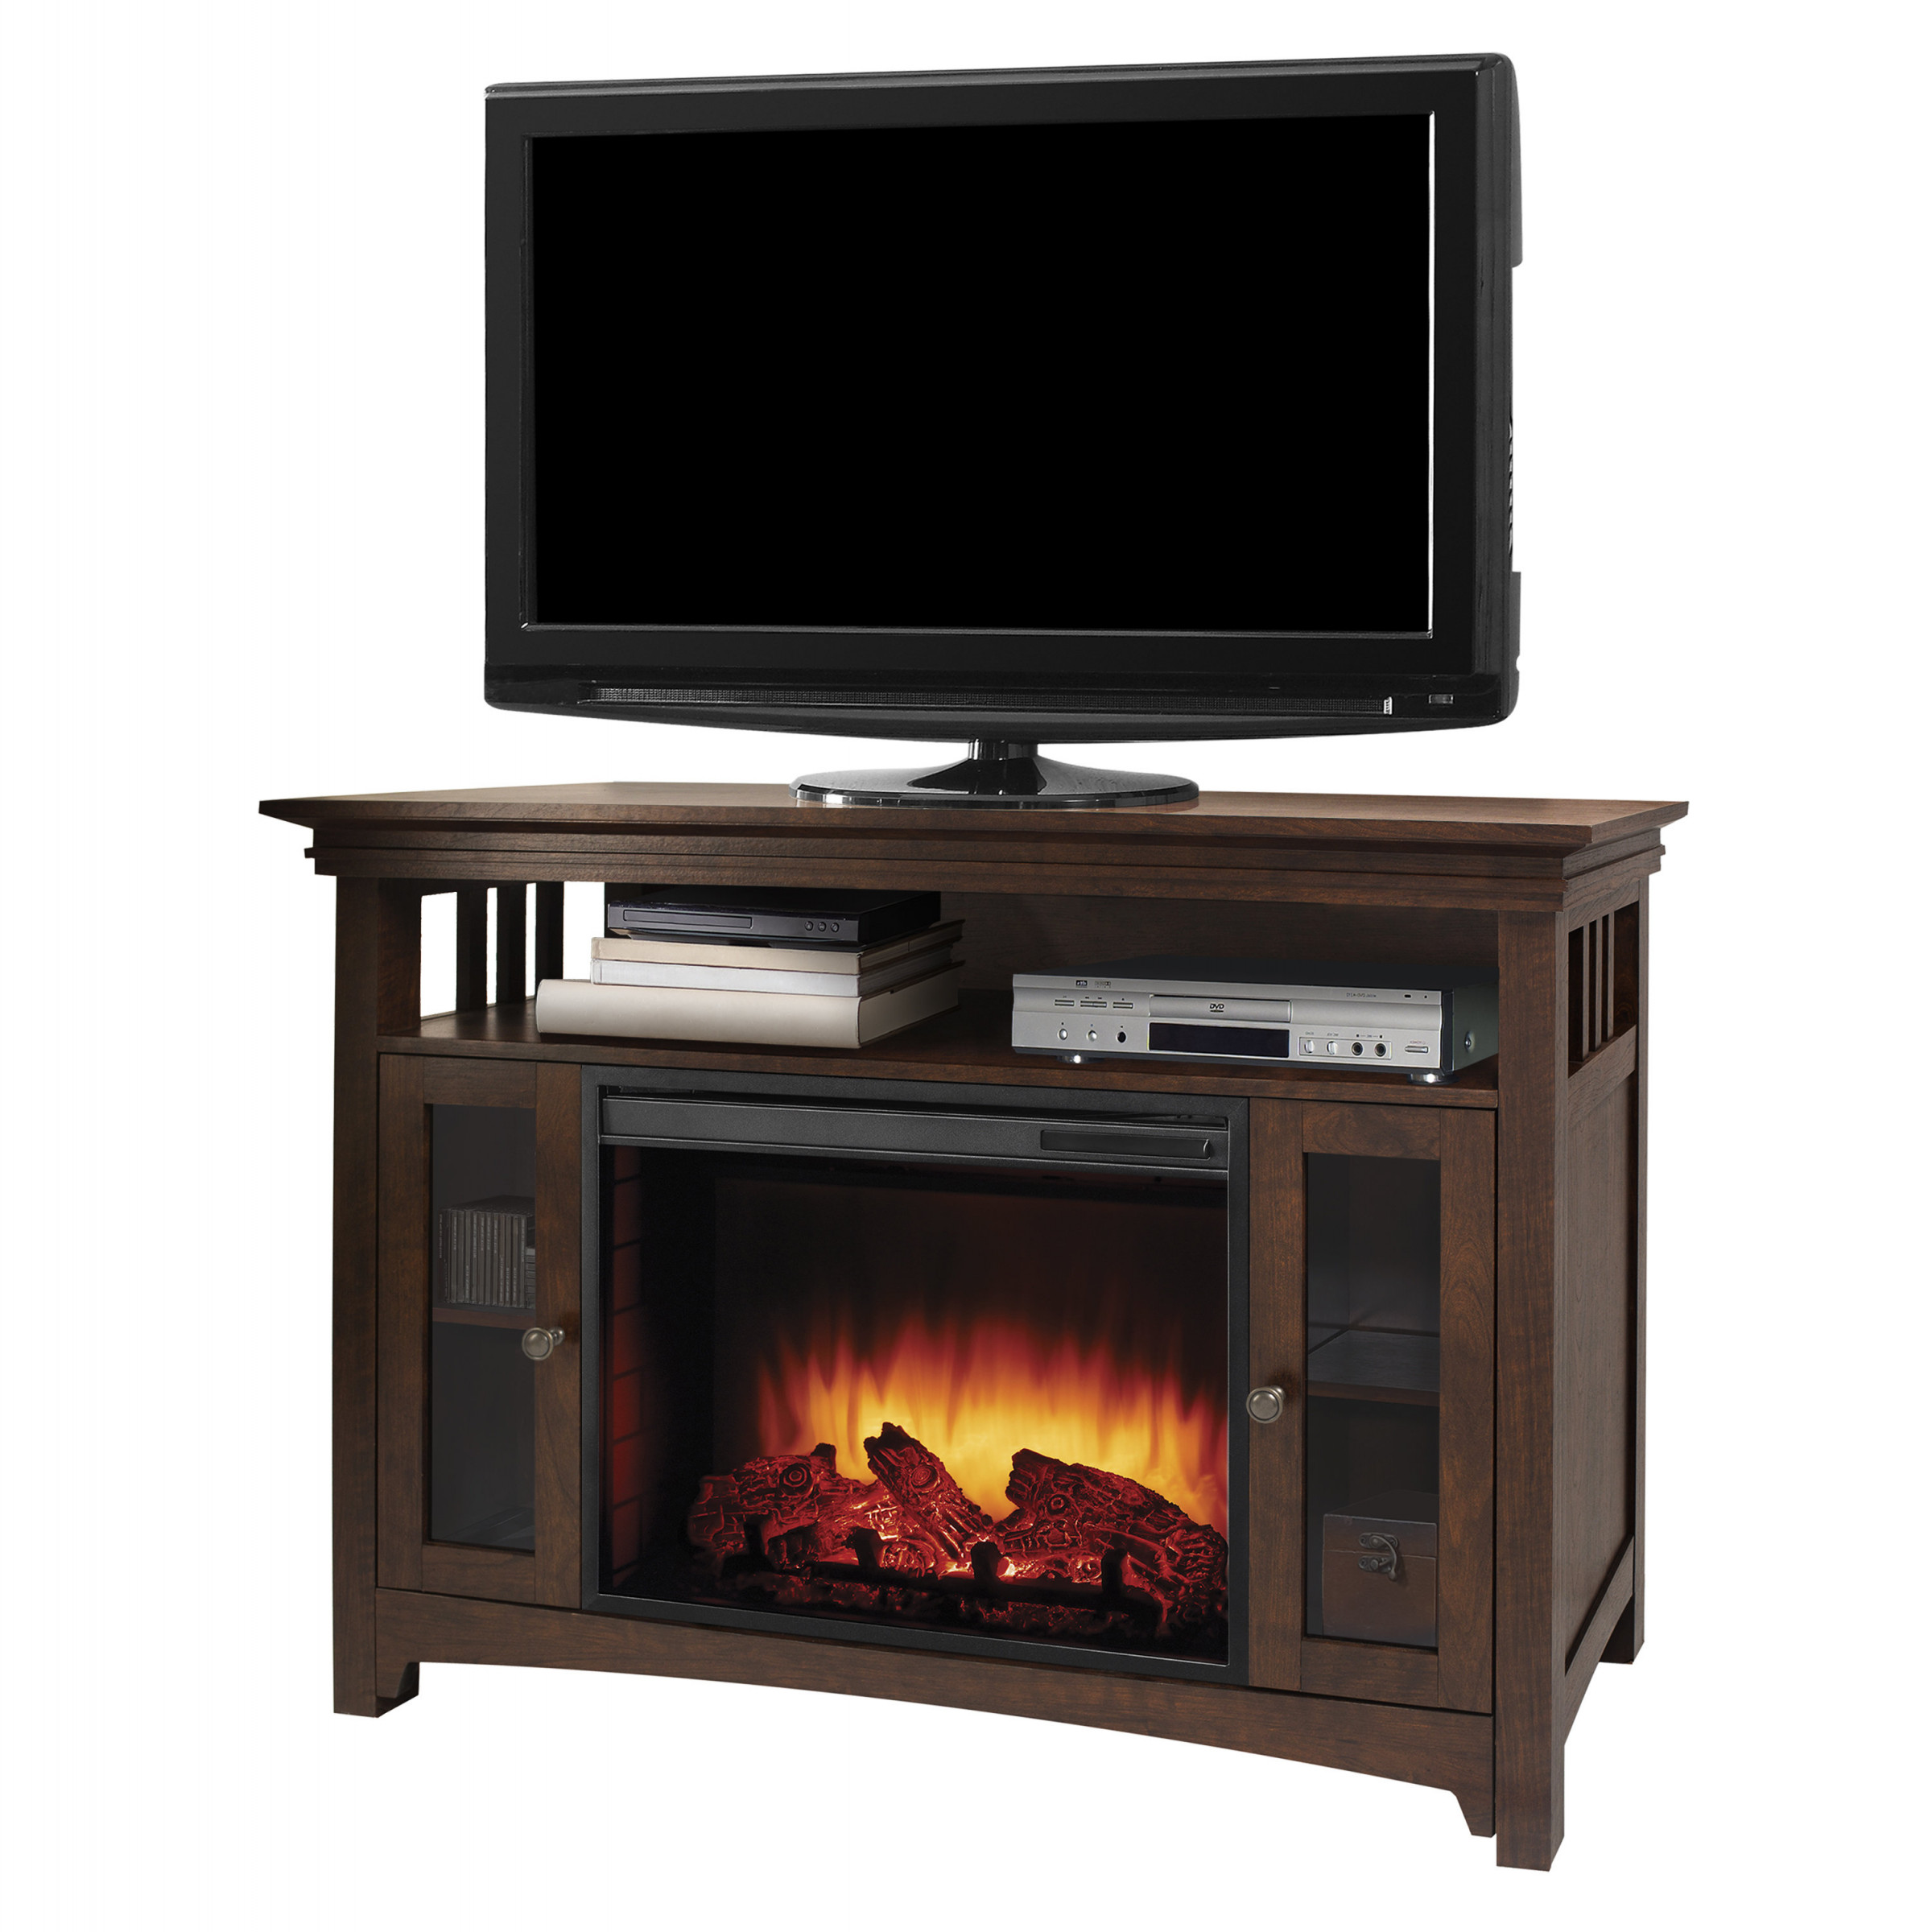 Outdoor Electric Fireplace Lovely 35 Minimaliste Electric Fireplace Tv Stand